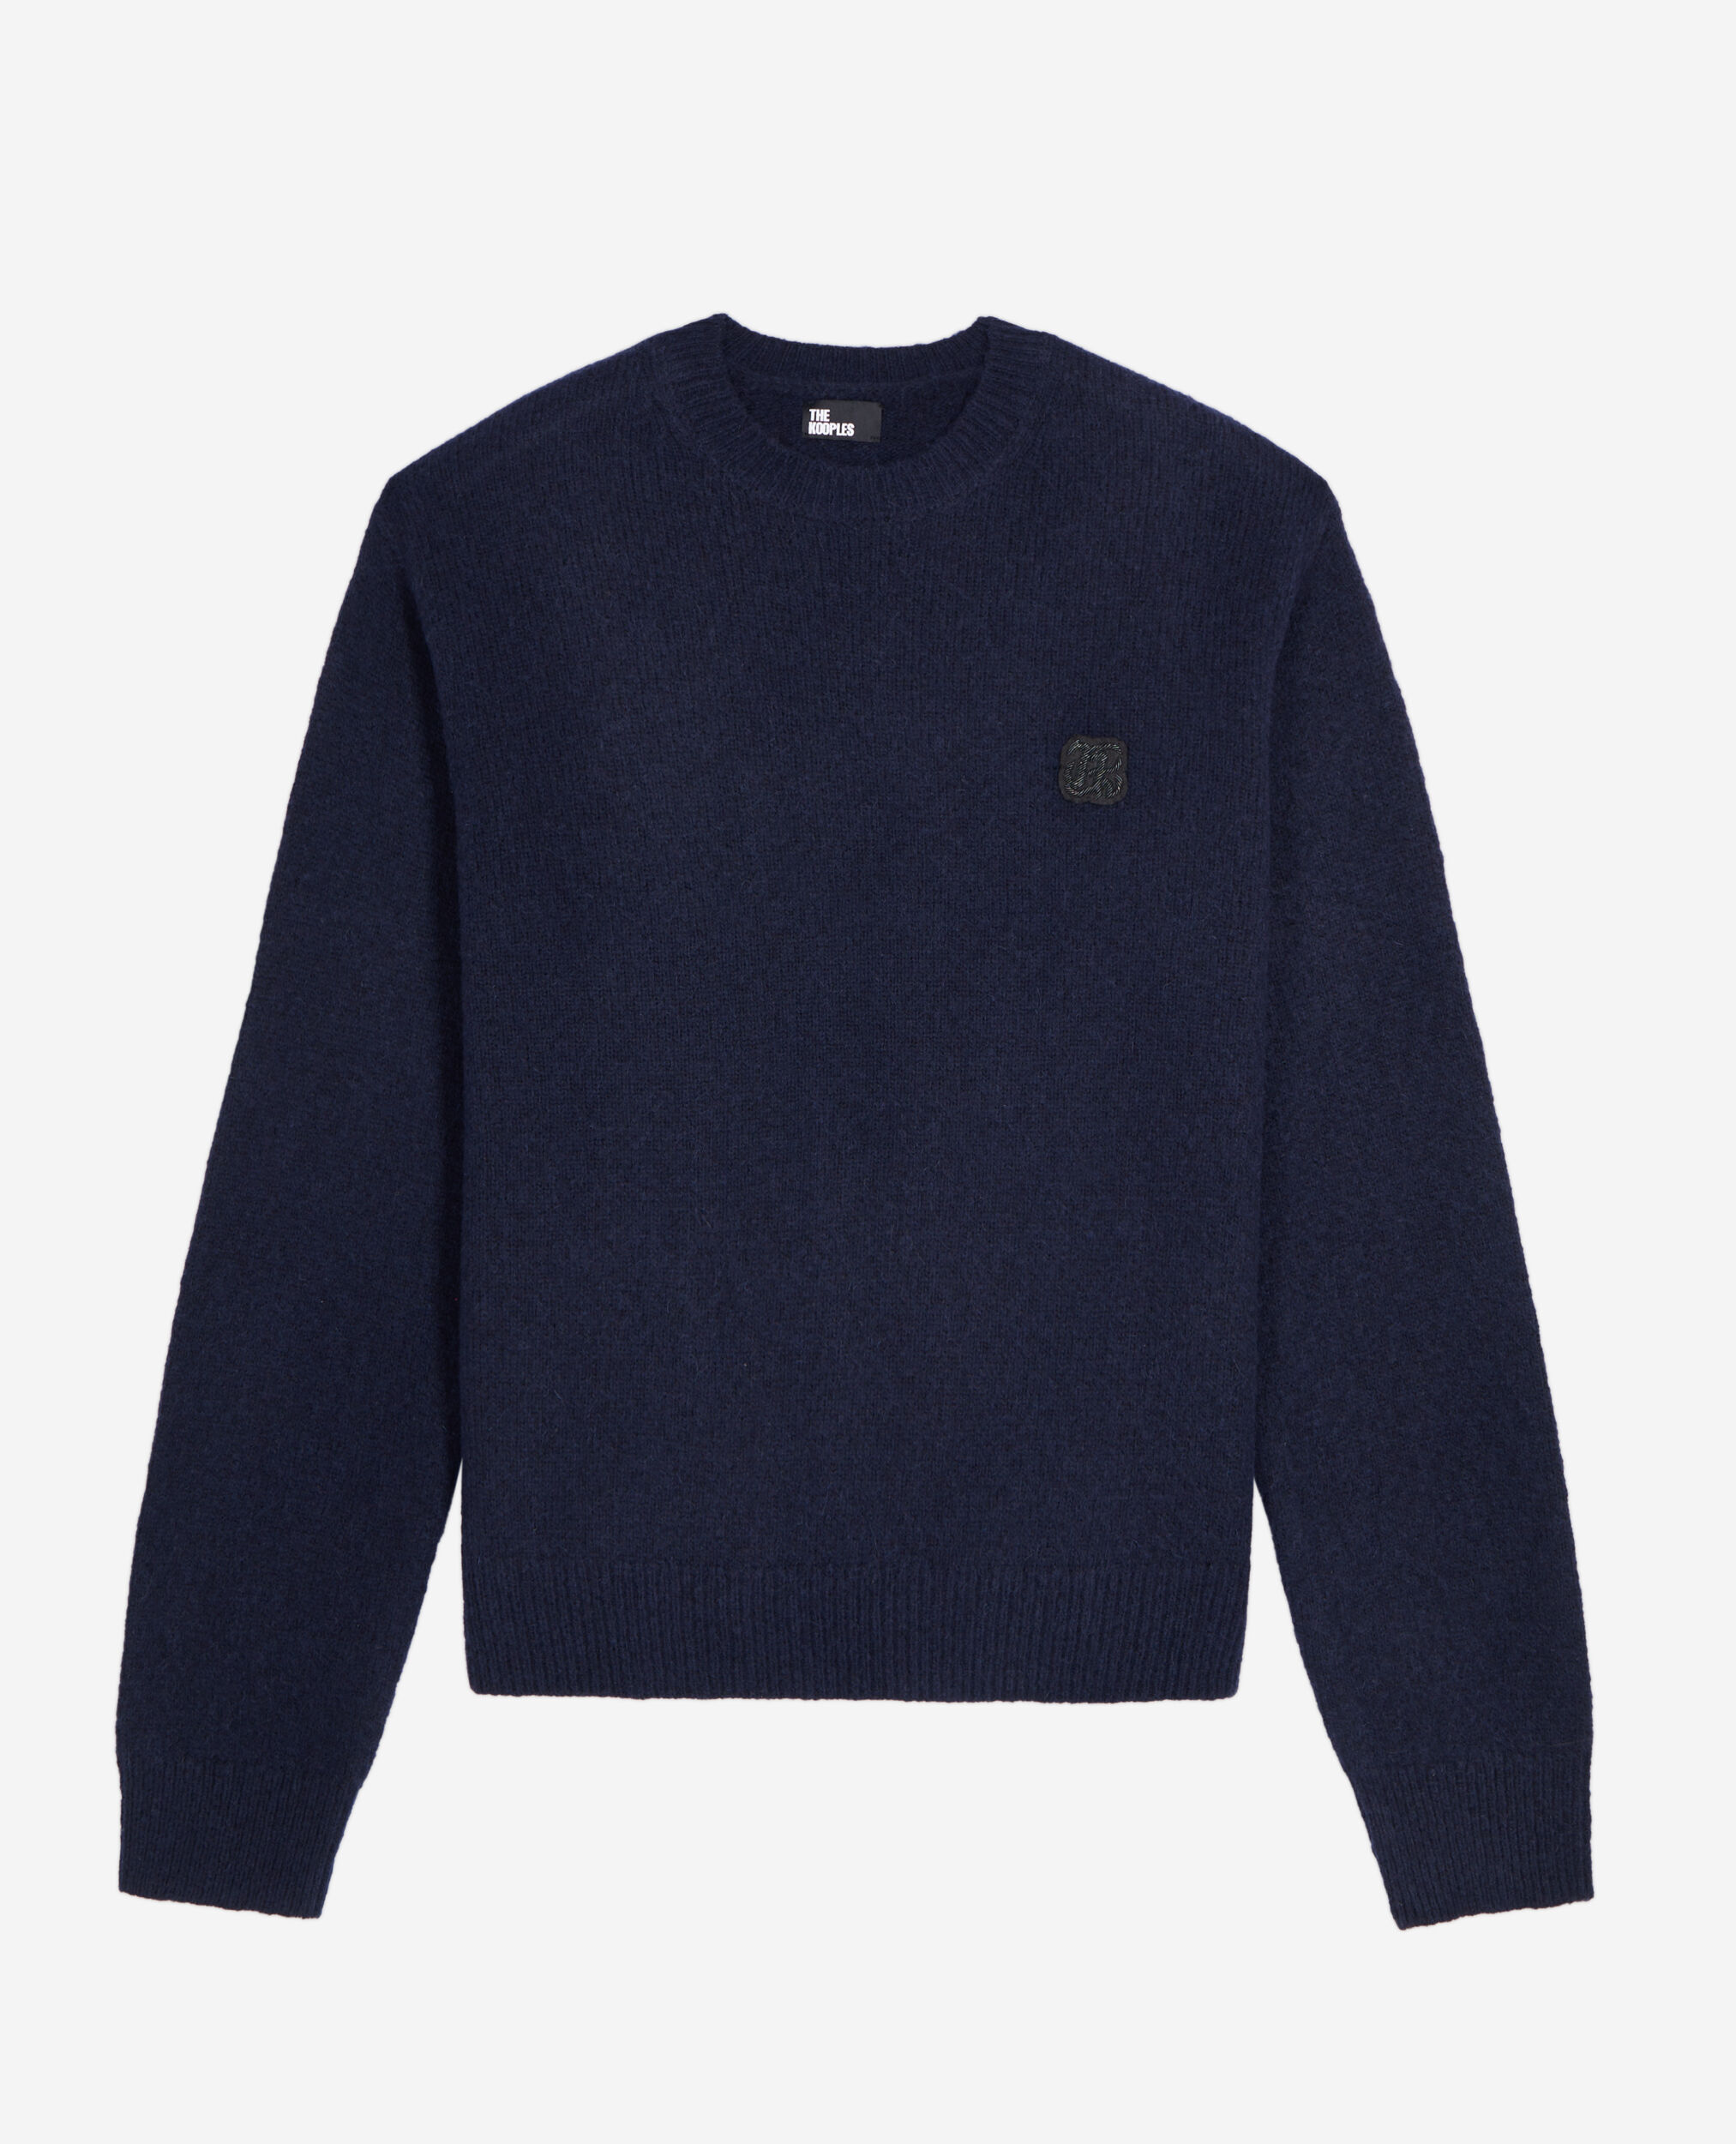 Navy blue wool and alpaca blend sweater, NAVY, hi-res image number null